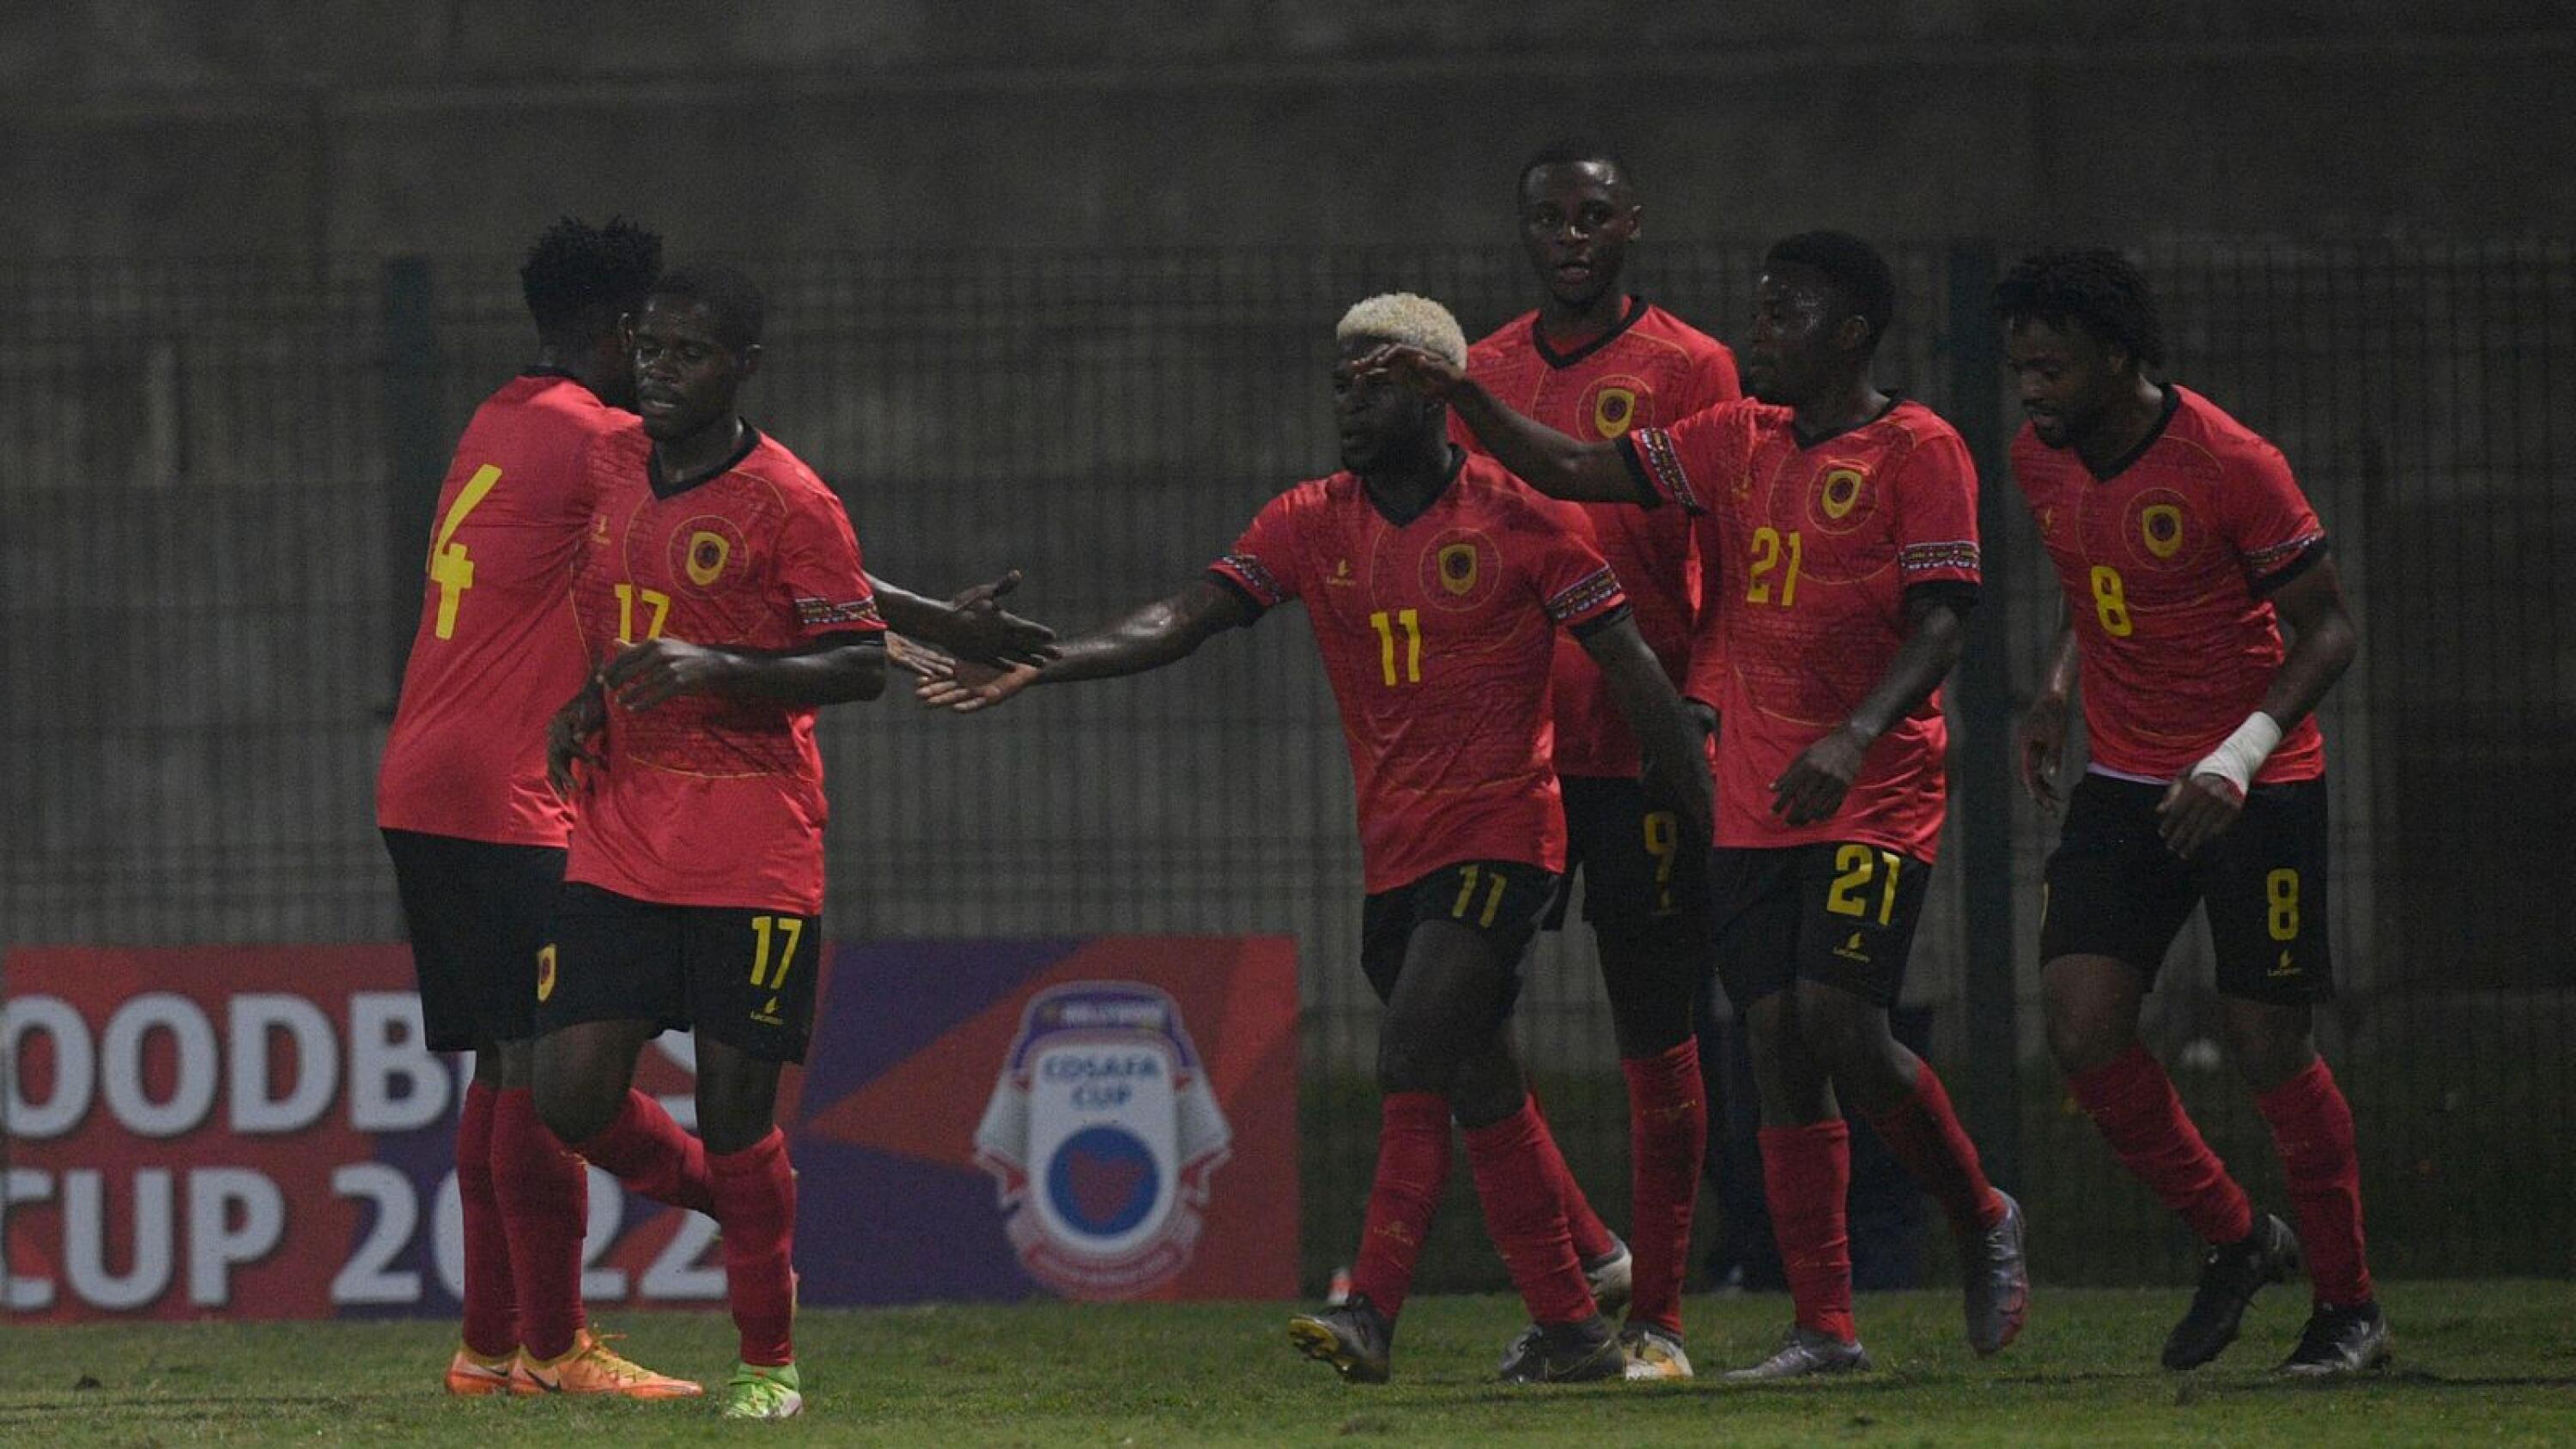 Paulo Juliao of Angola celebrates with teammates after scoring a goal during their 2022 Hollywoodbets Cosafa Cup match against Comoros at King Zwelithini Stadium in Durban on Tuesday